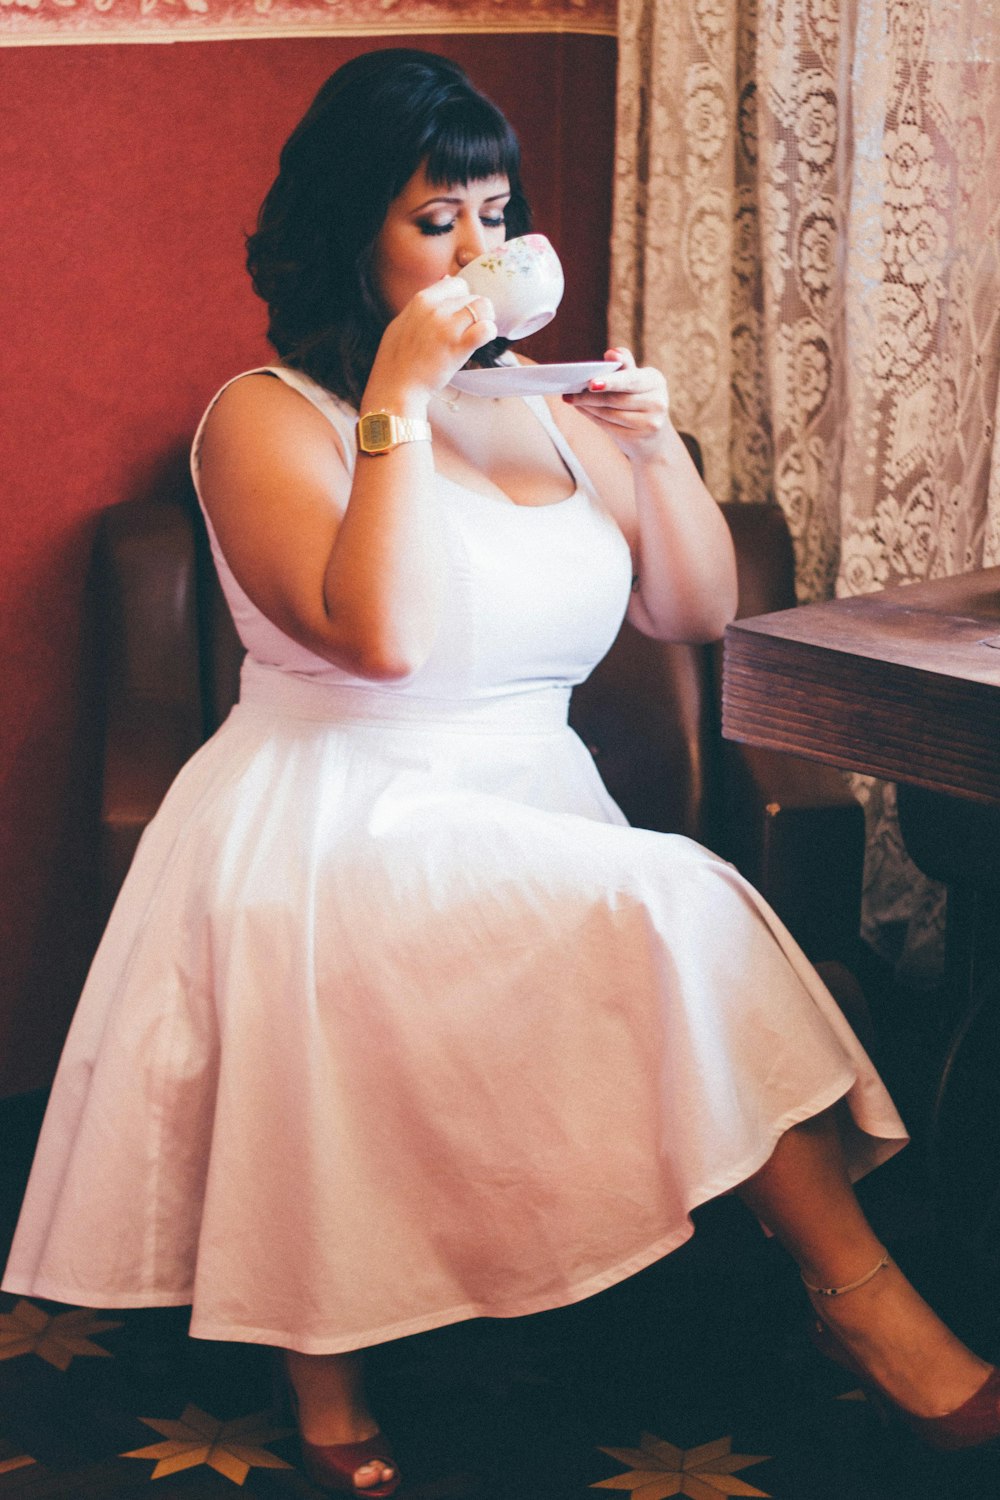 A woman sipping on a cup of tea.